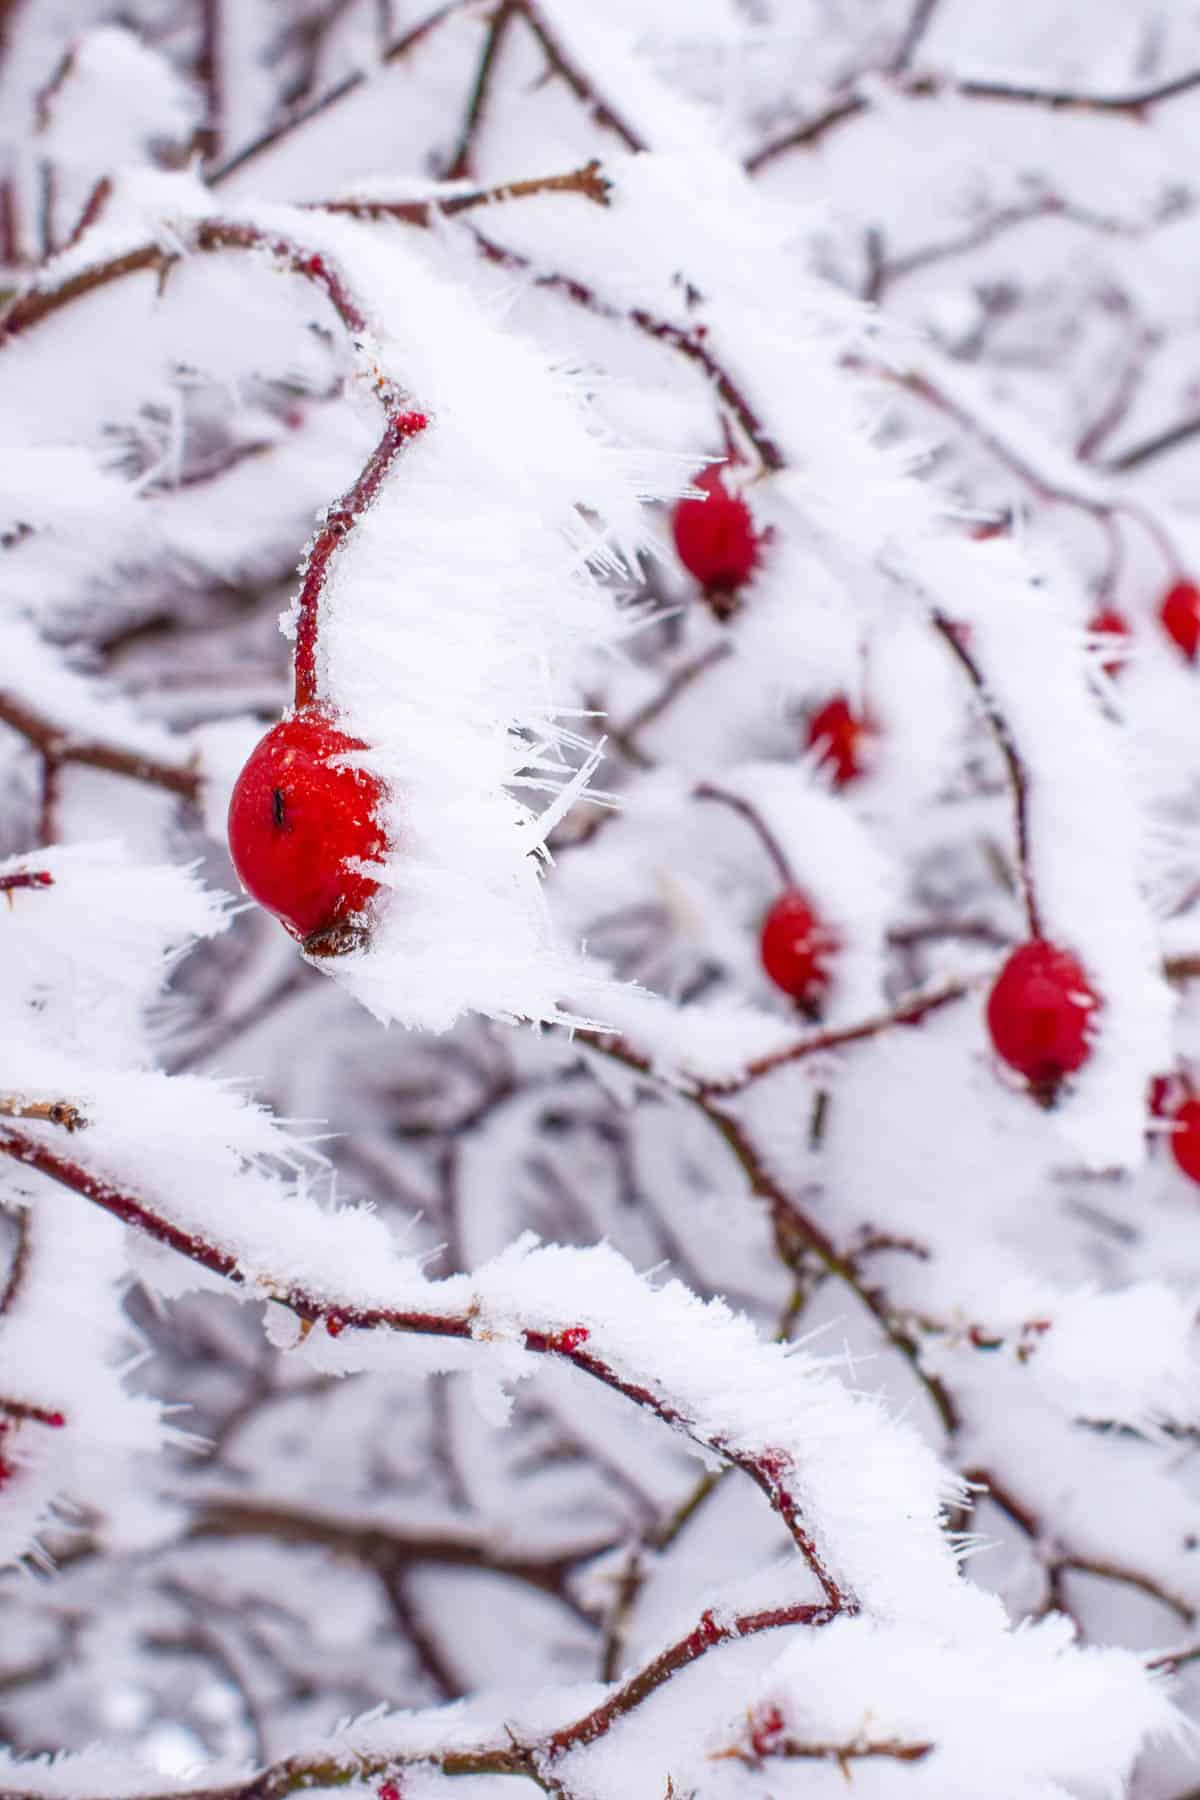 dog rose hips in winter, covered in snow